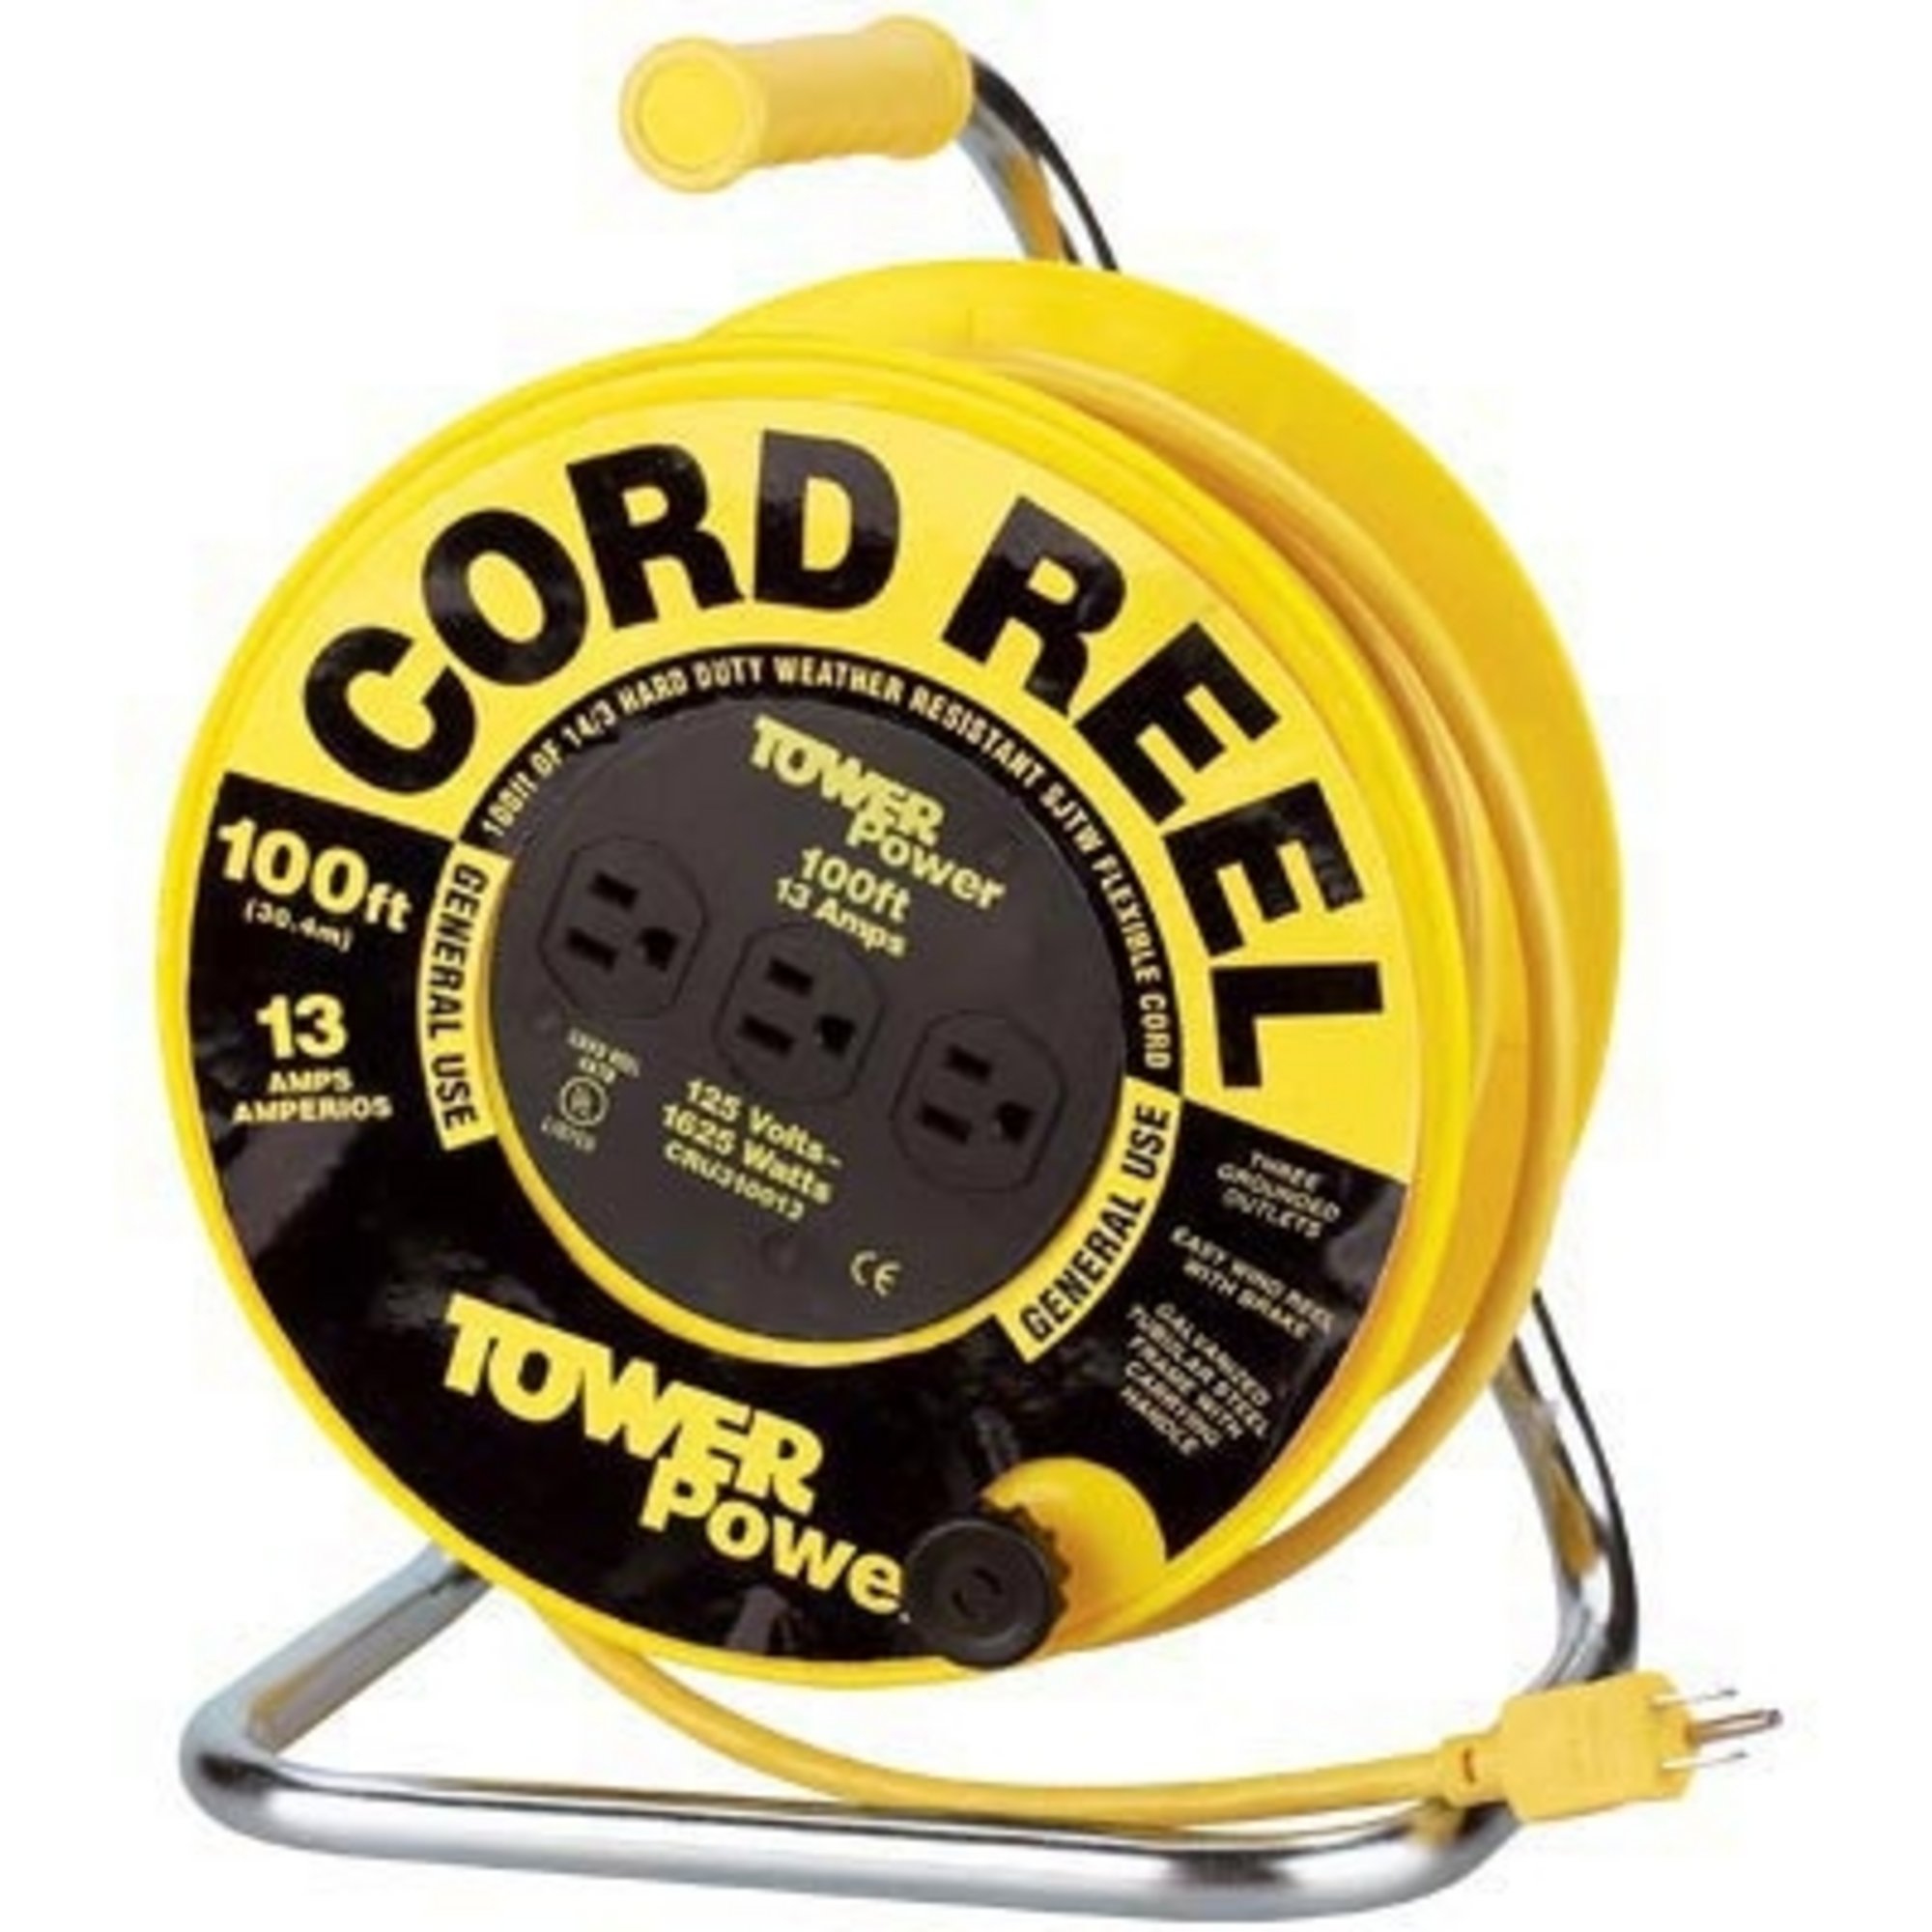 Northern Industrial Electrical Cord Reel — 13 Amp, 100ft.